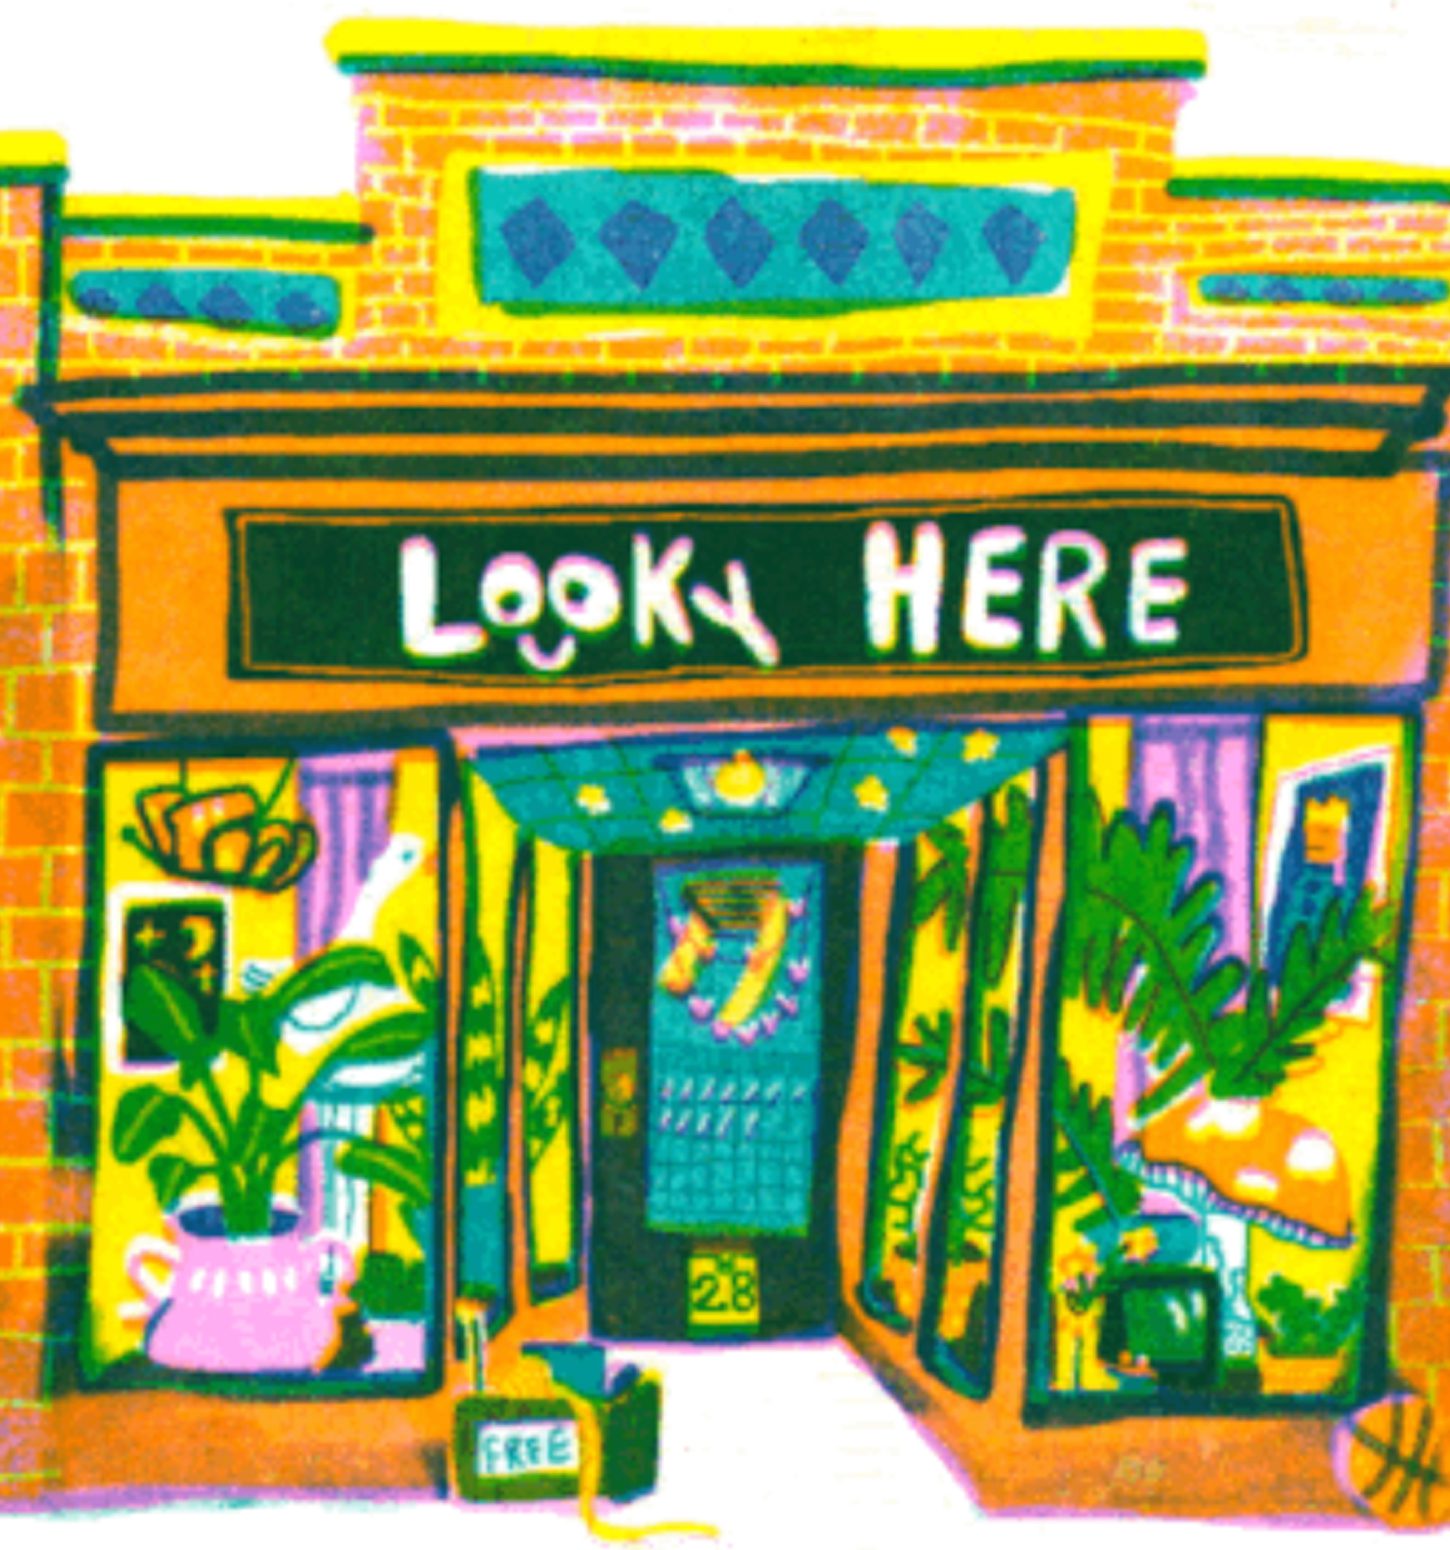 Art of Stylized Looky Here Storefront